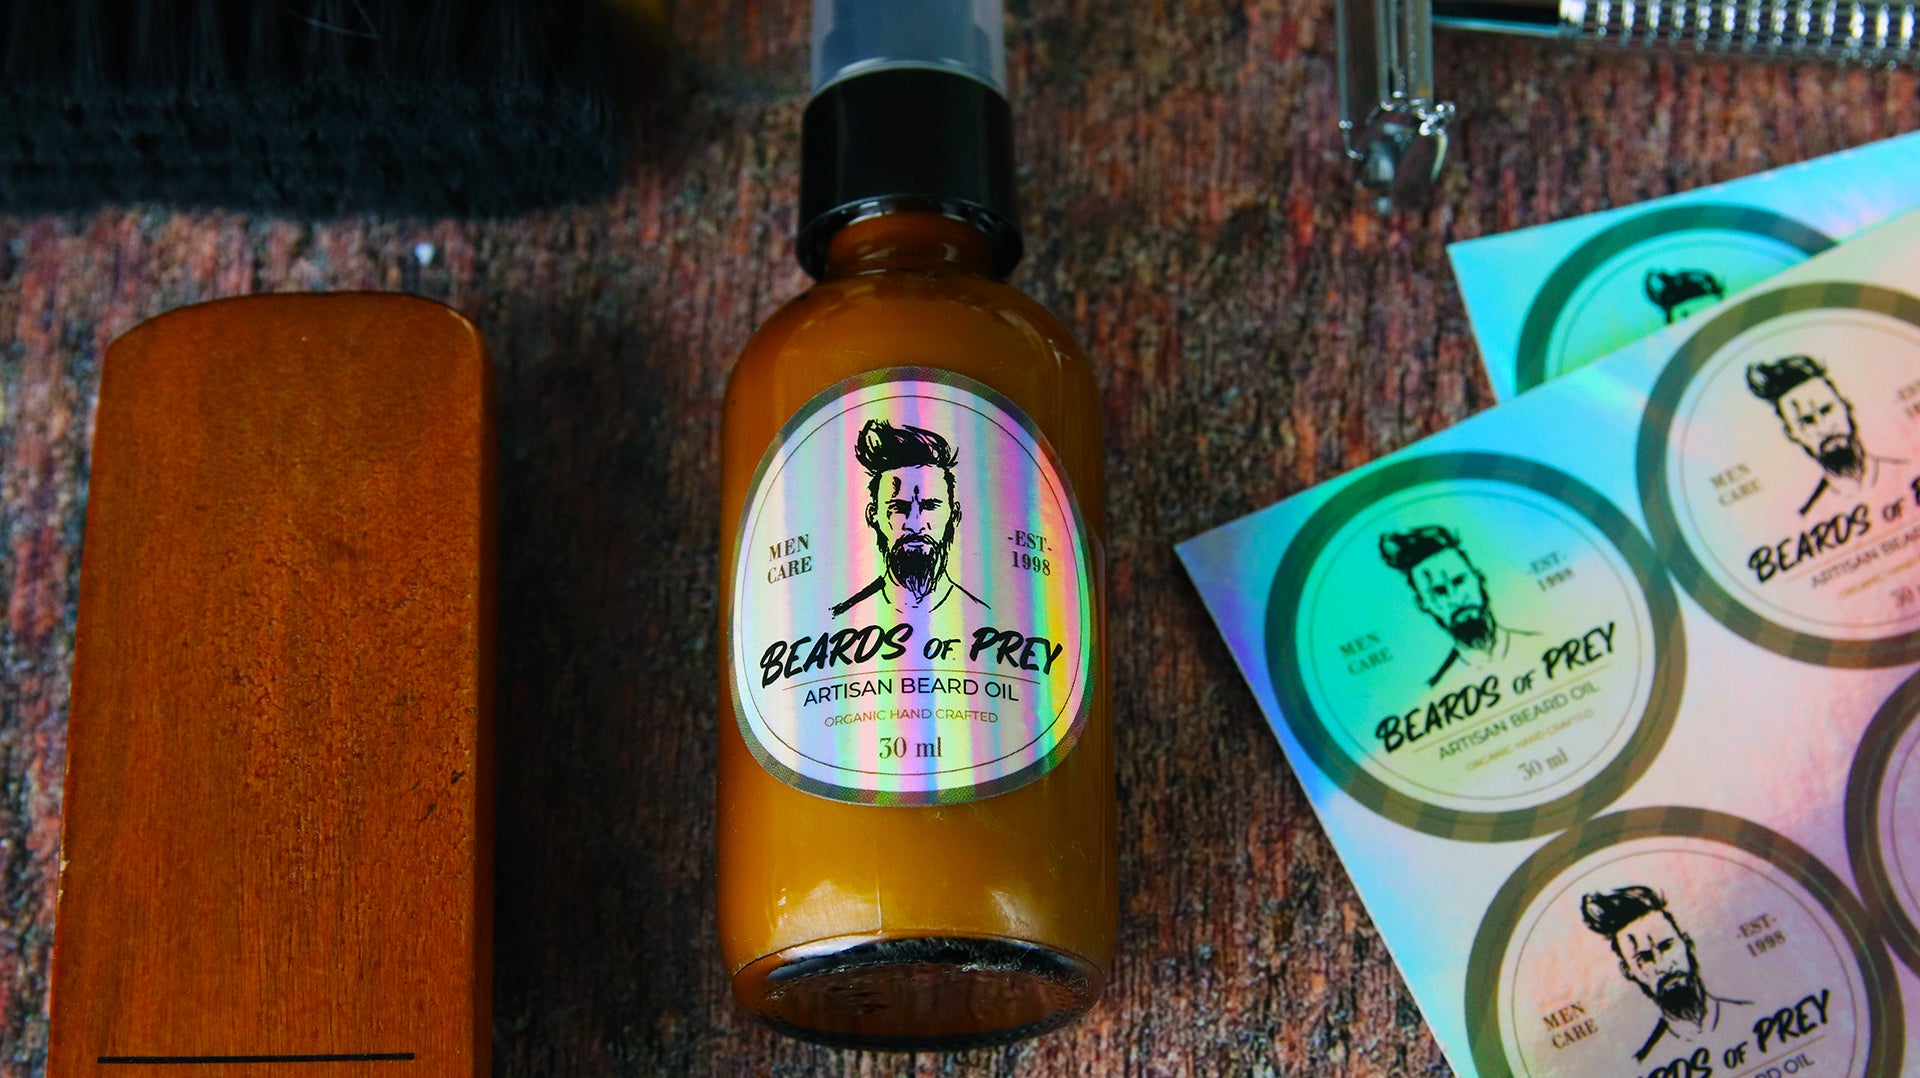 Circle holographic sheet waterproof labels applied to an amber jar with beard oil